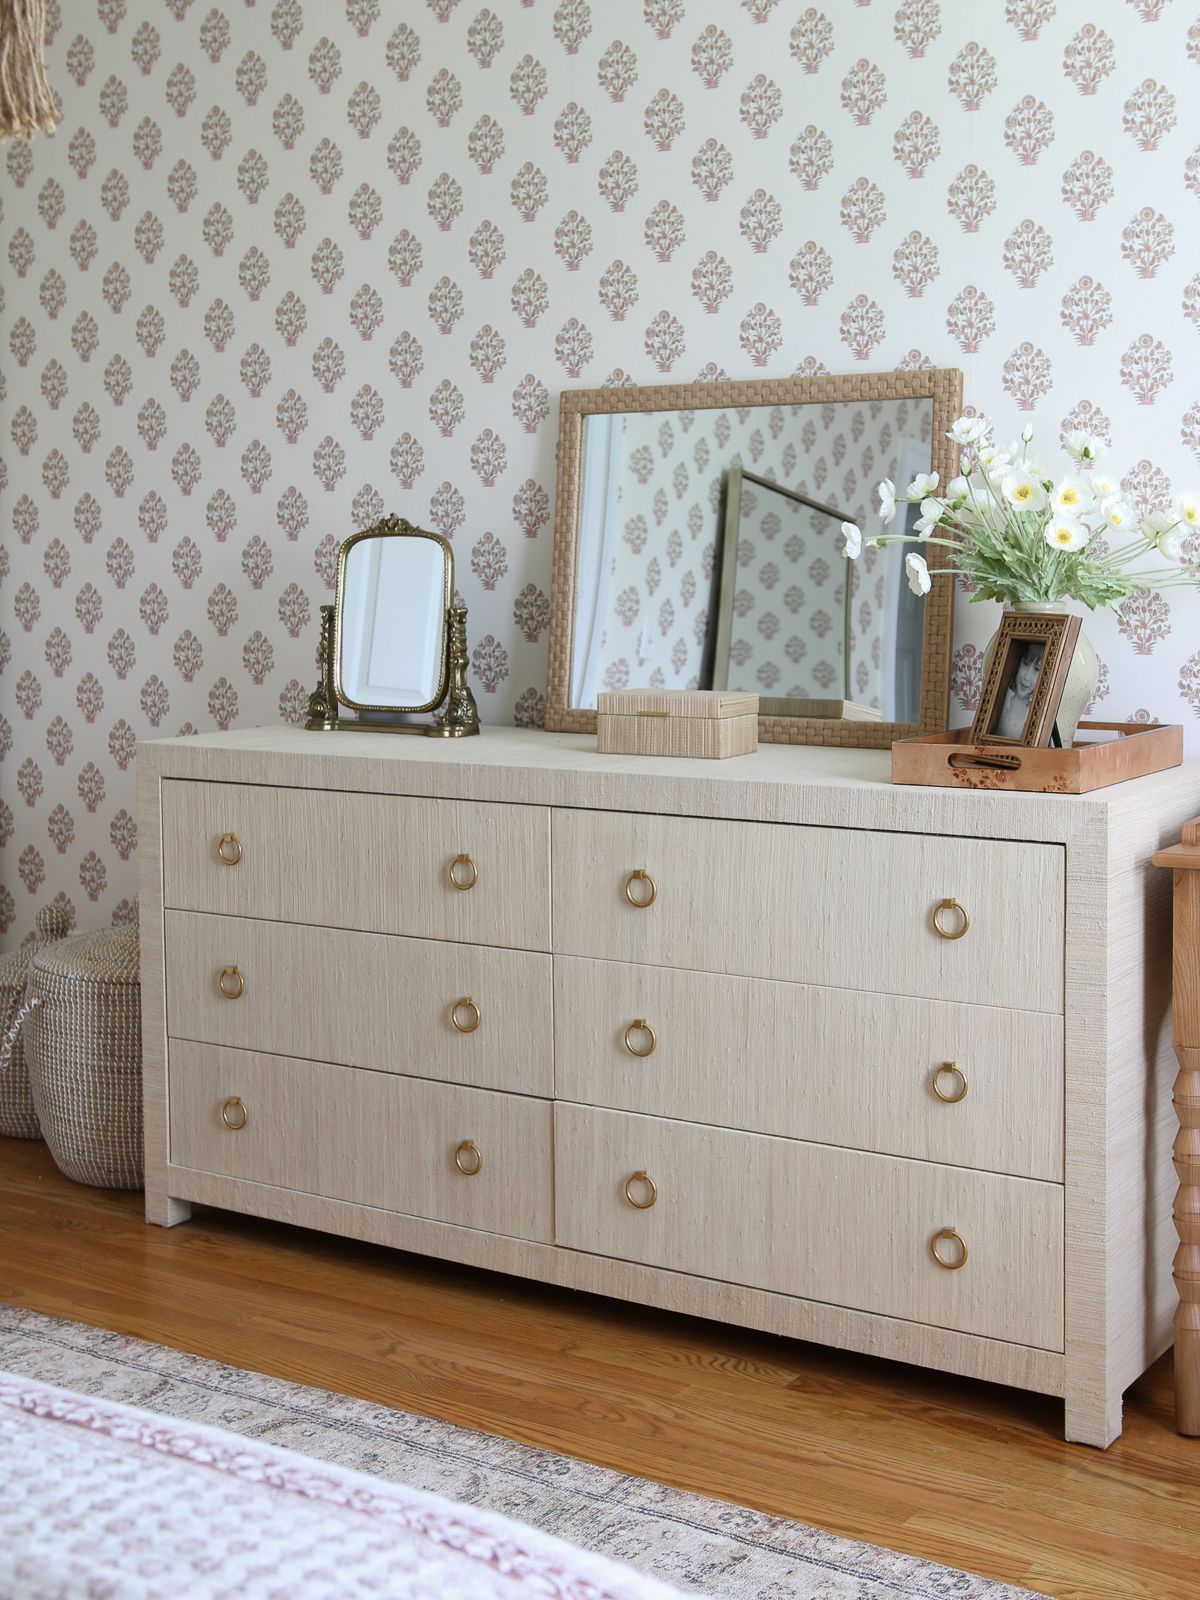 seagrass wrapped dresser with a gold vanity mirror, large woven rope mirror, burl wood tray, block print wallpaper